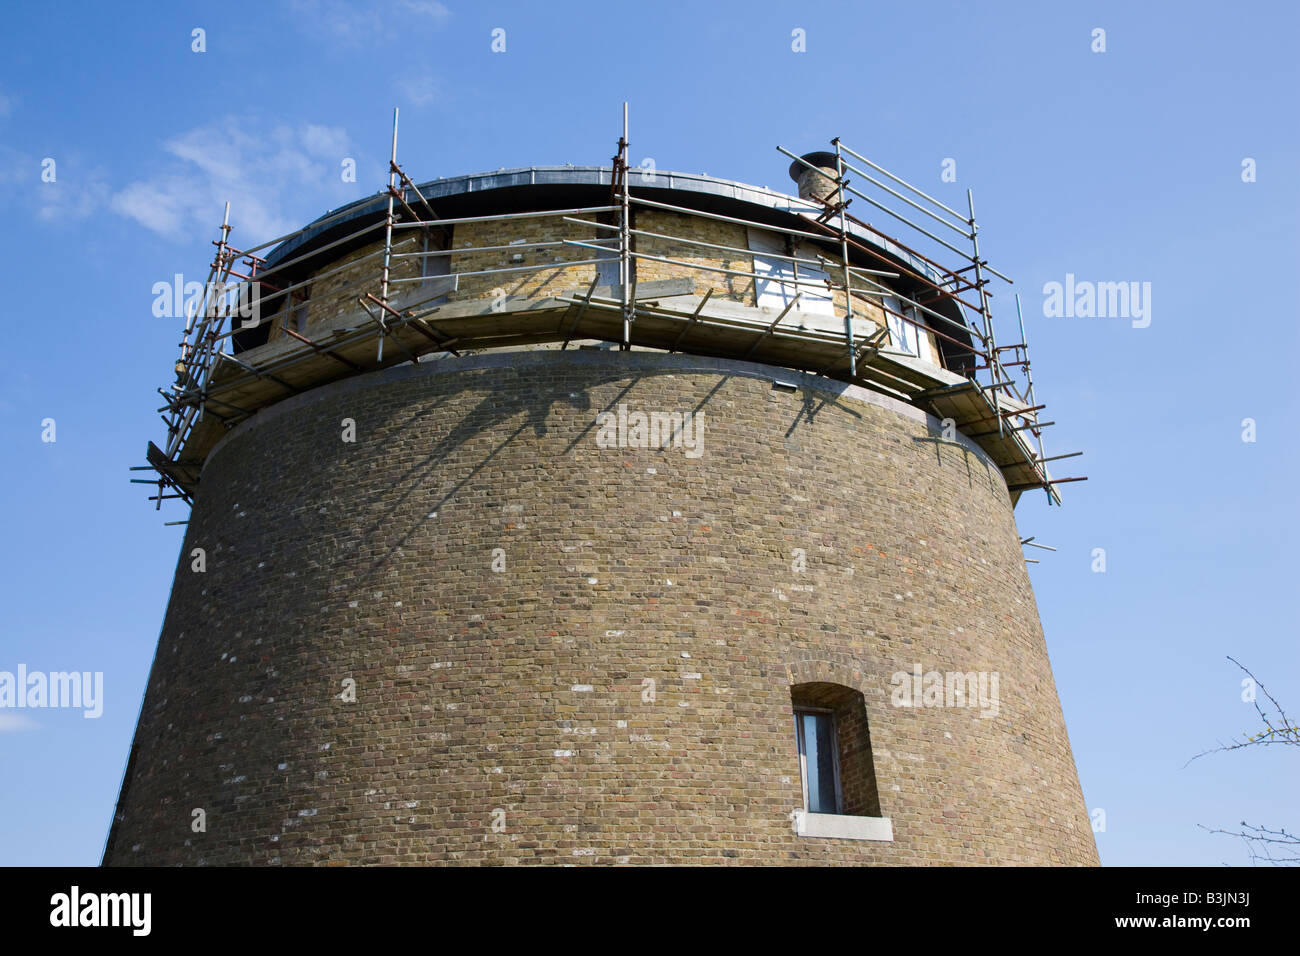 Martello Tower a military structure undergoing conversion into a residential dwelling Stock Photo